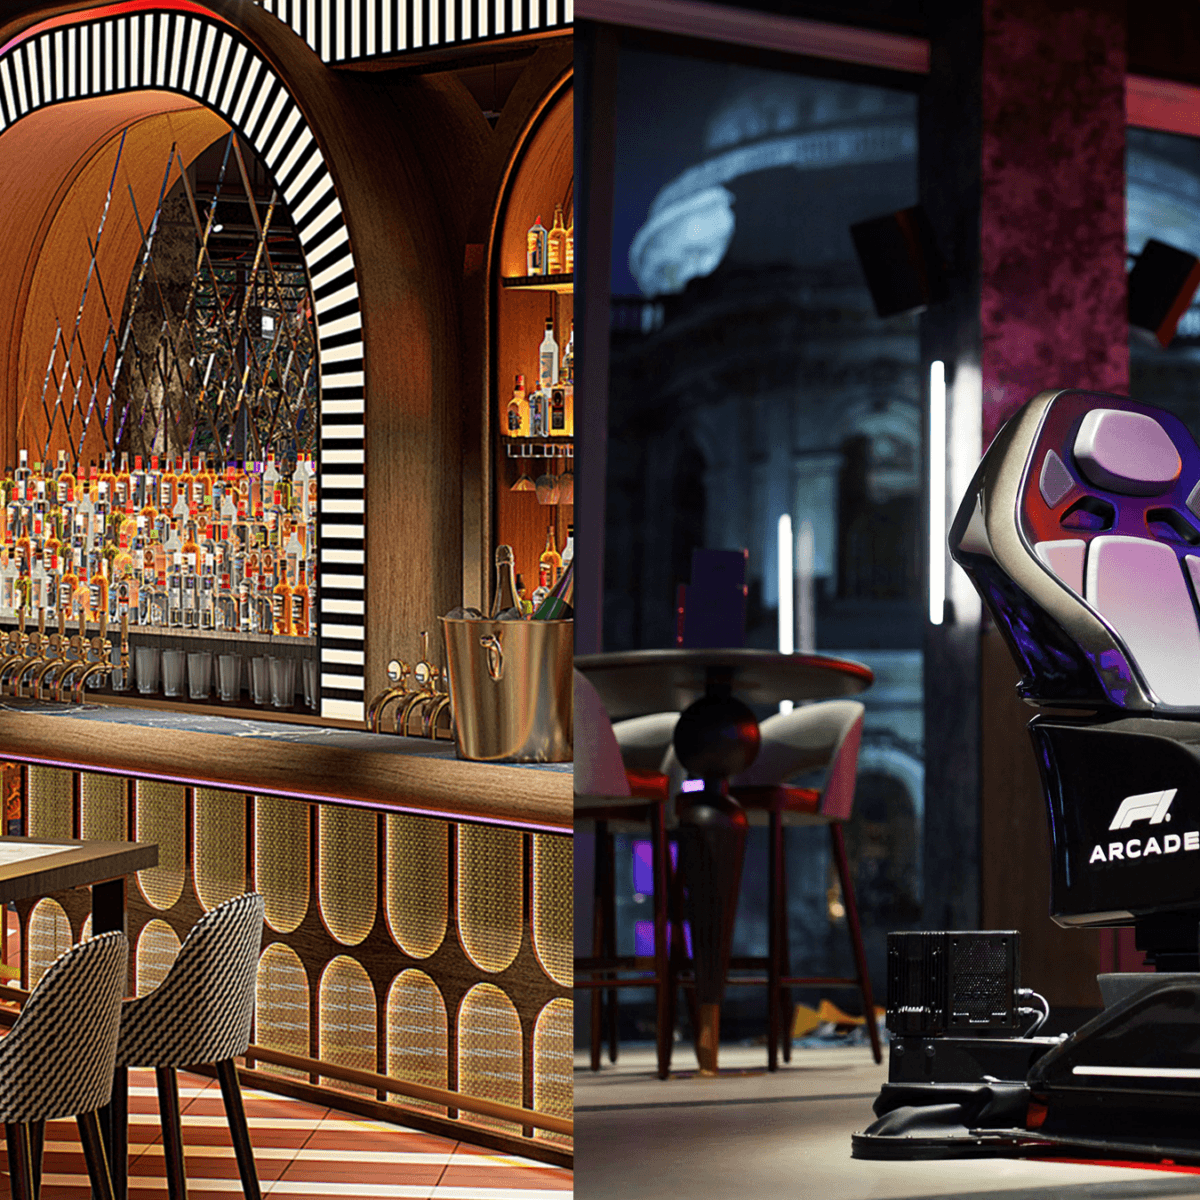 left image, the bar inside the F1 arcade. right imafe: A racing chair setup inside the F1 arcade.